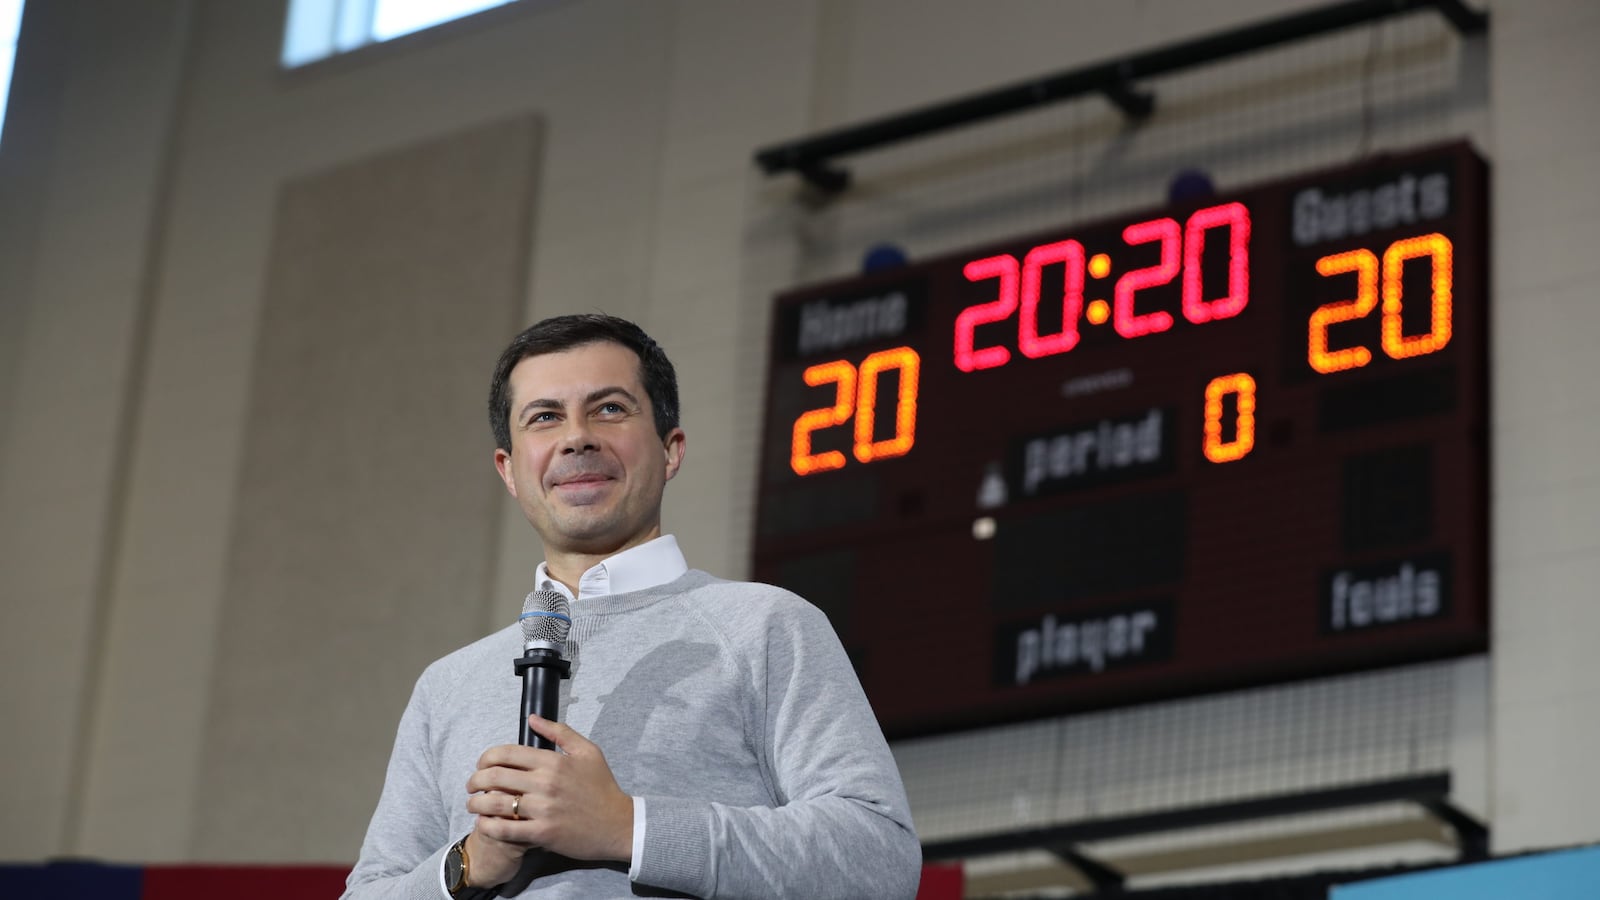 NEW HAMPTON, NEW HAMPSHIRE - NOVEMBER 09: Democratic presidential candidate South Bend, Indiana Mayor Pete Buttigieg speaks during a town hall event at Lebanon Middle School. (Photo by Joe Raedle/Getty Images)